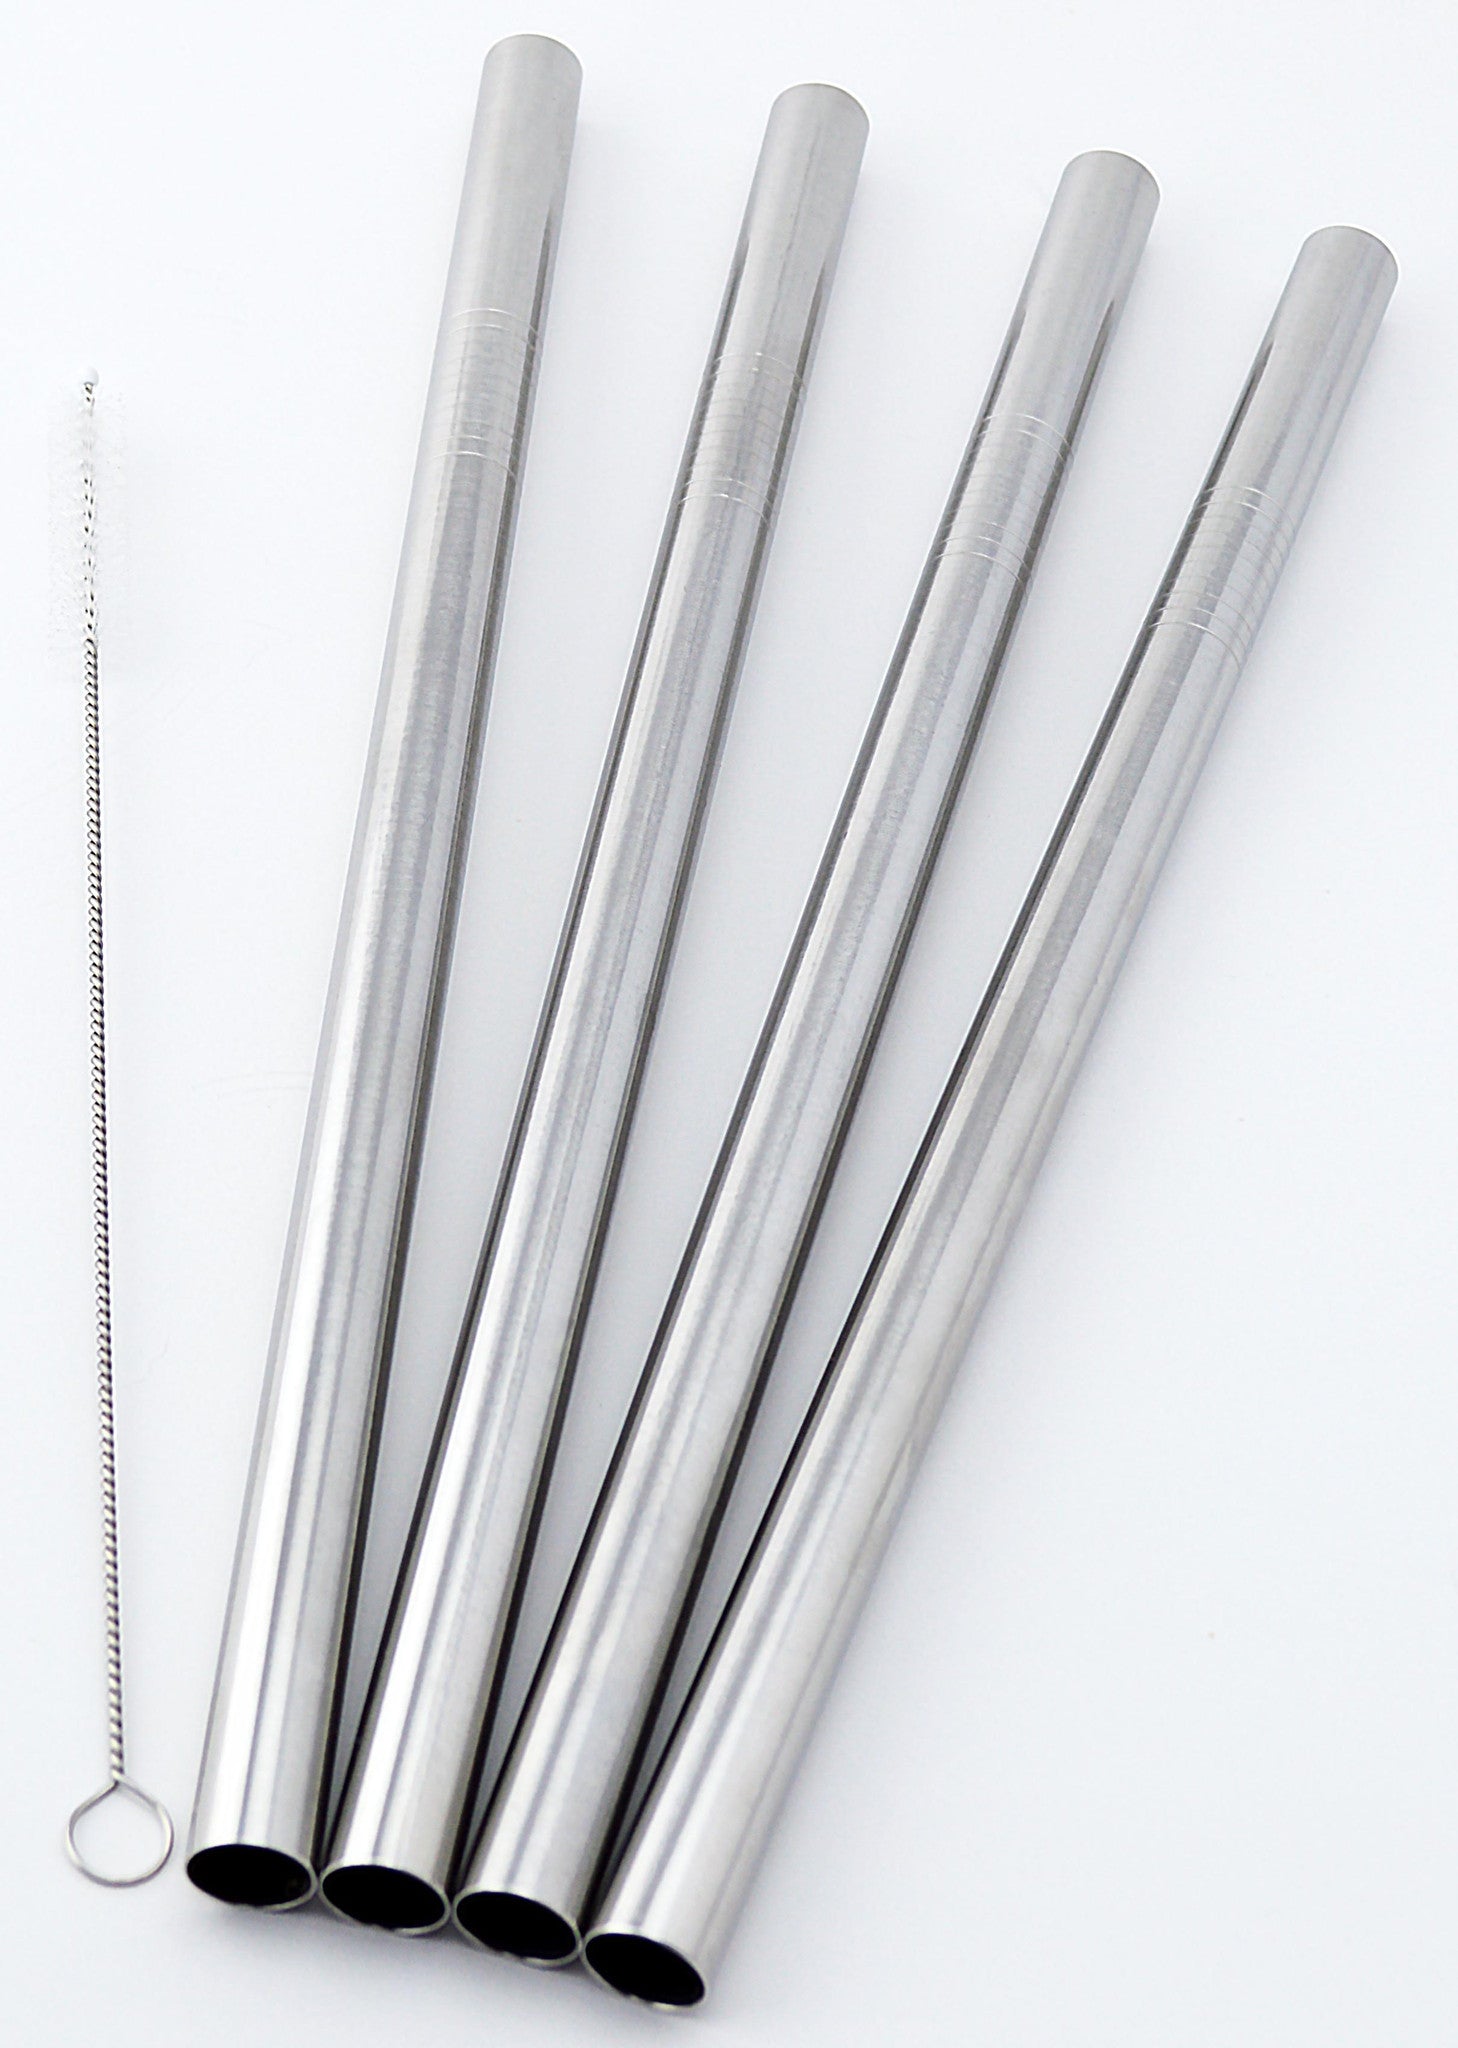 EXTRA WIDE REUSABLE METAL STRAW, JUMBO STAINLESS STEEL BOBA STRAW